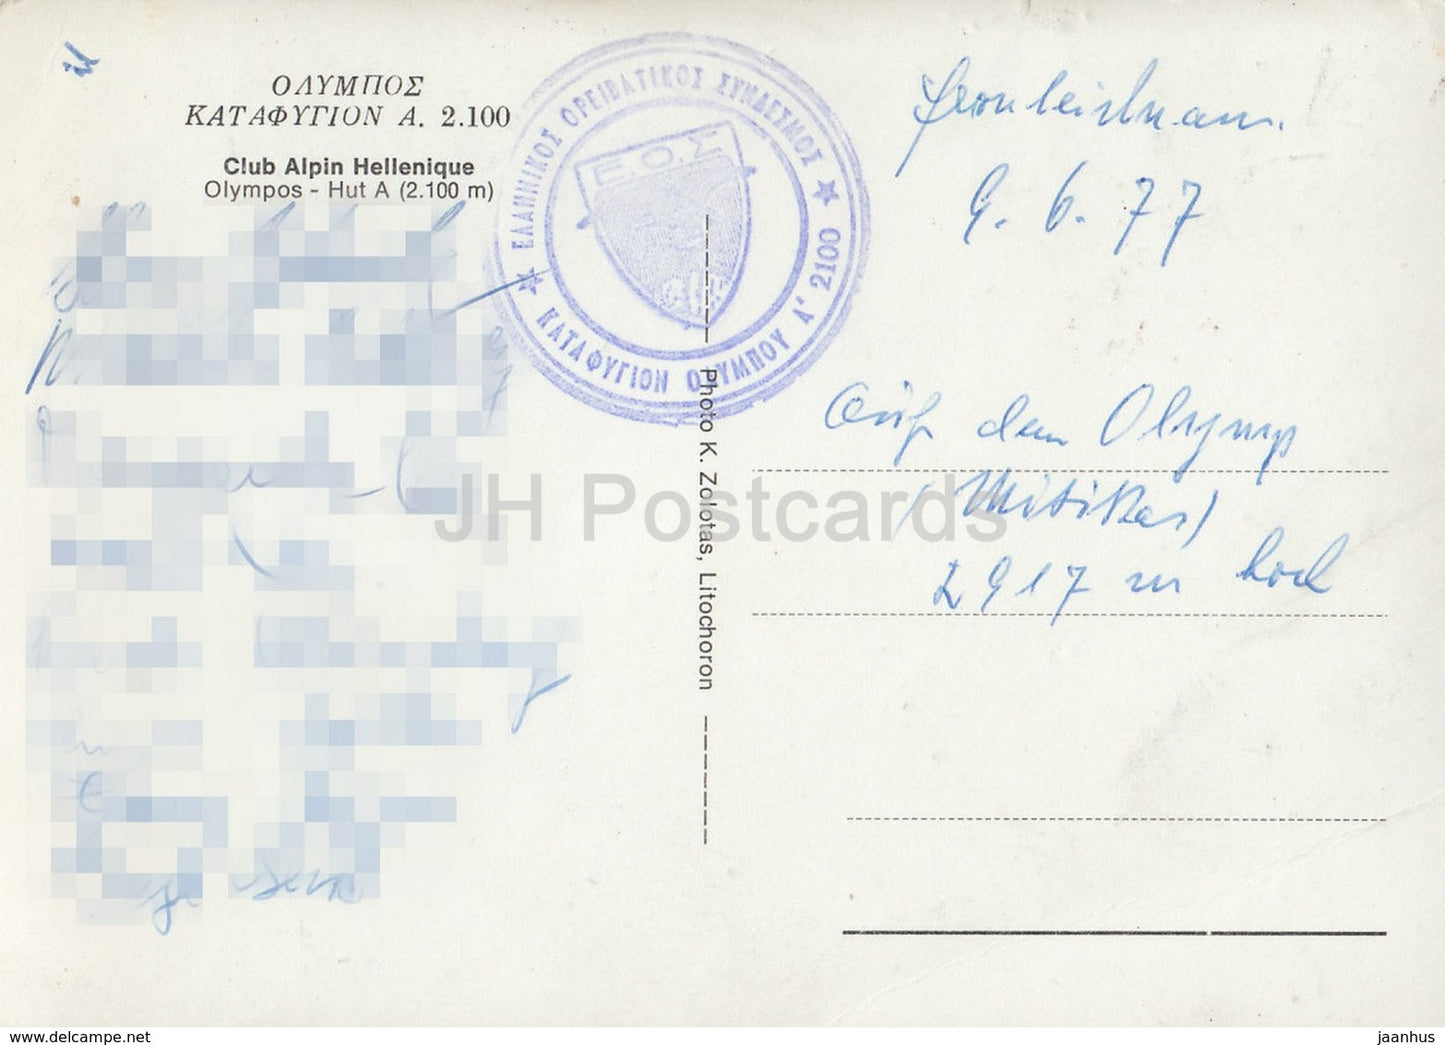 Club Alpin Hellenique - Olympos mountain - Hut A 2100 m - 1977 - Greece - used